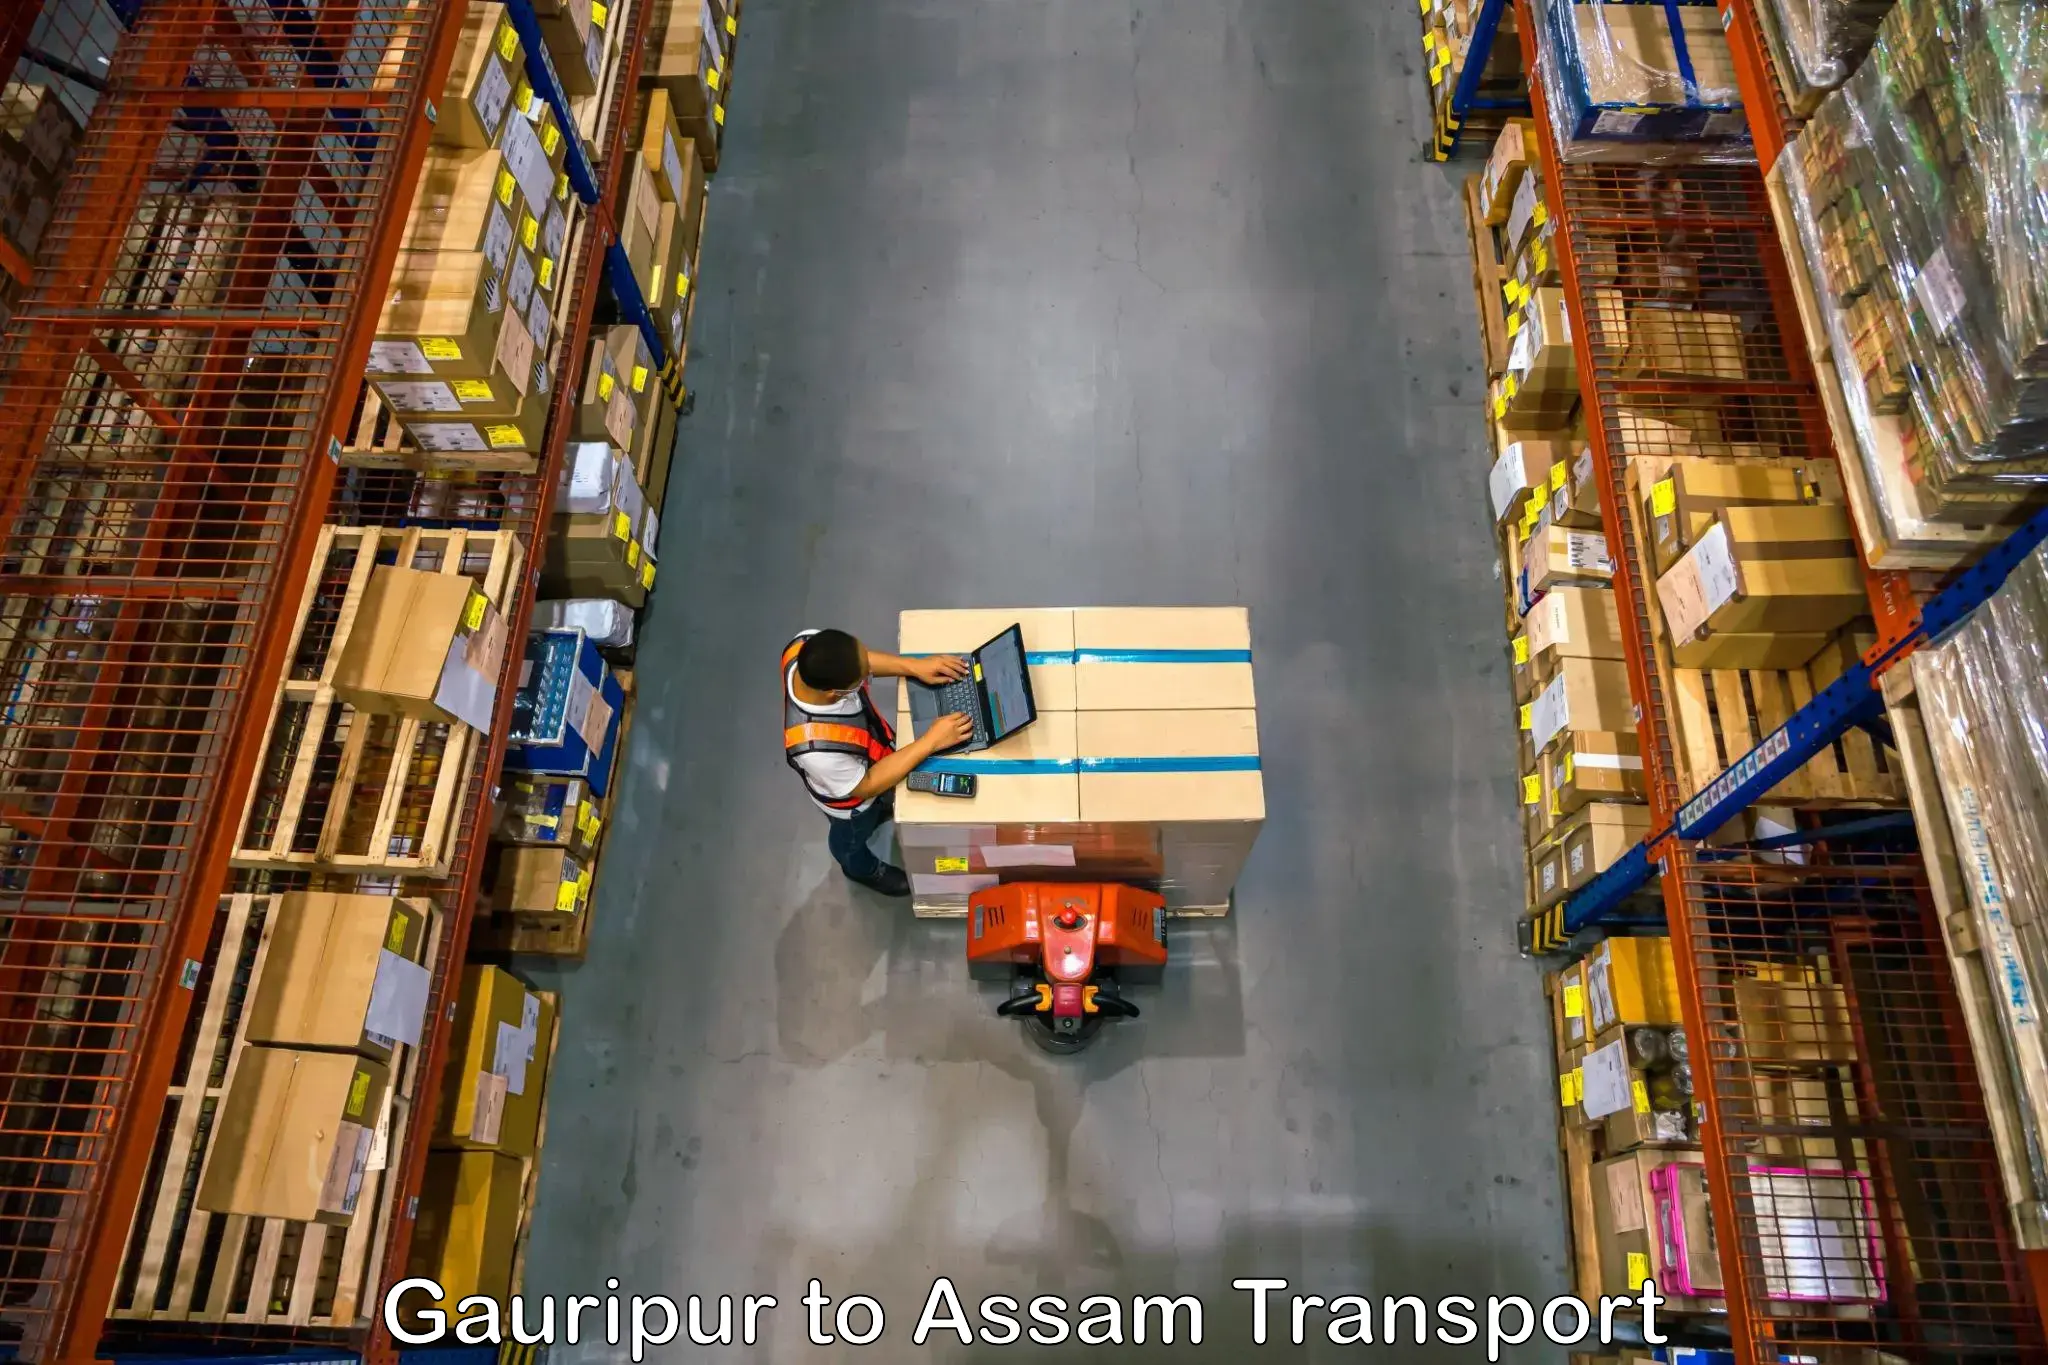 Goods delivery service Gauripur to Bhaga